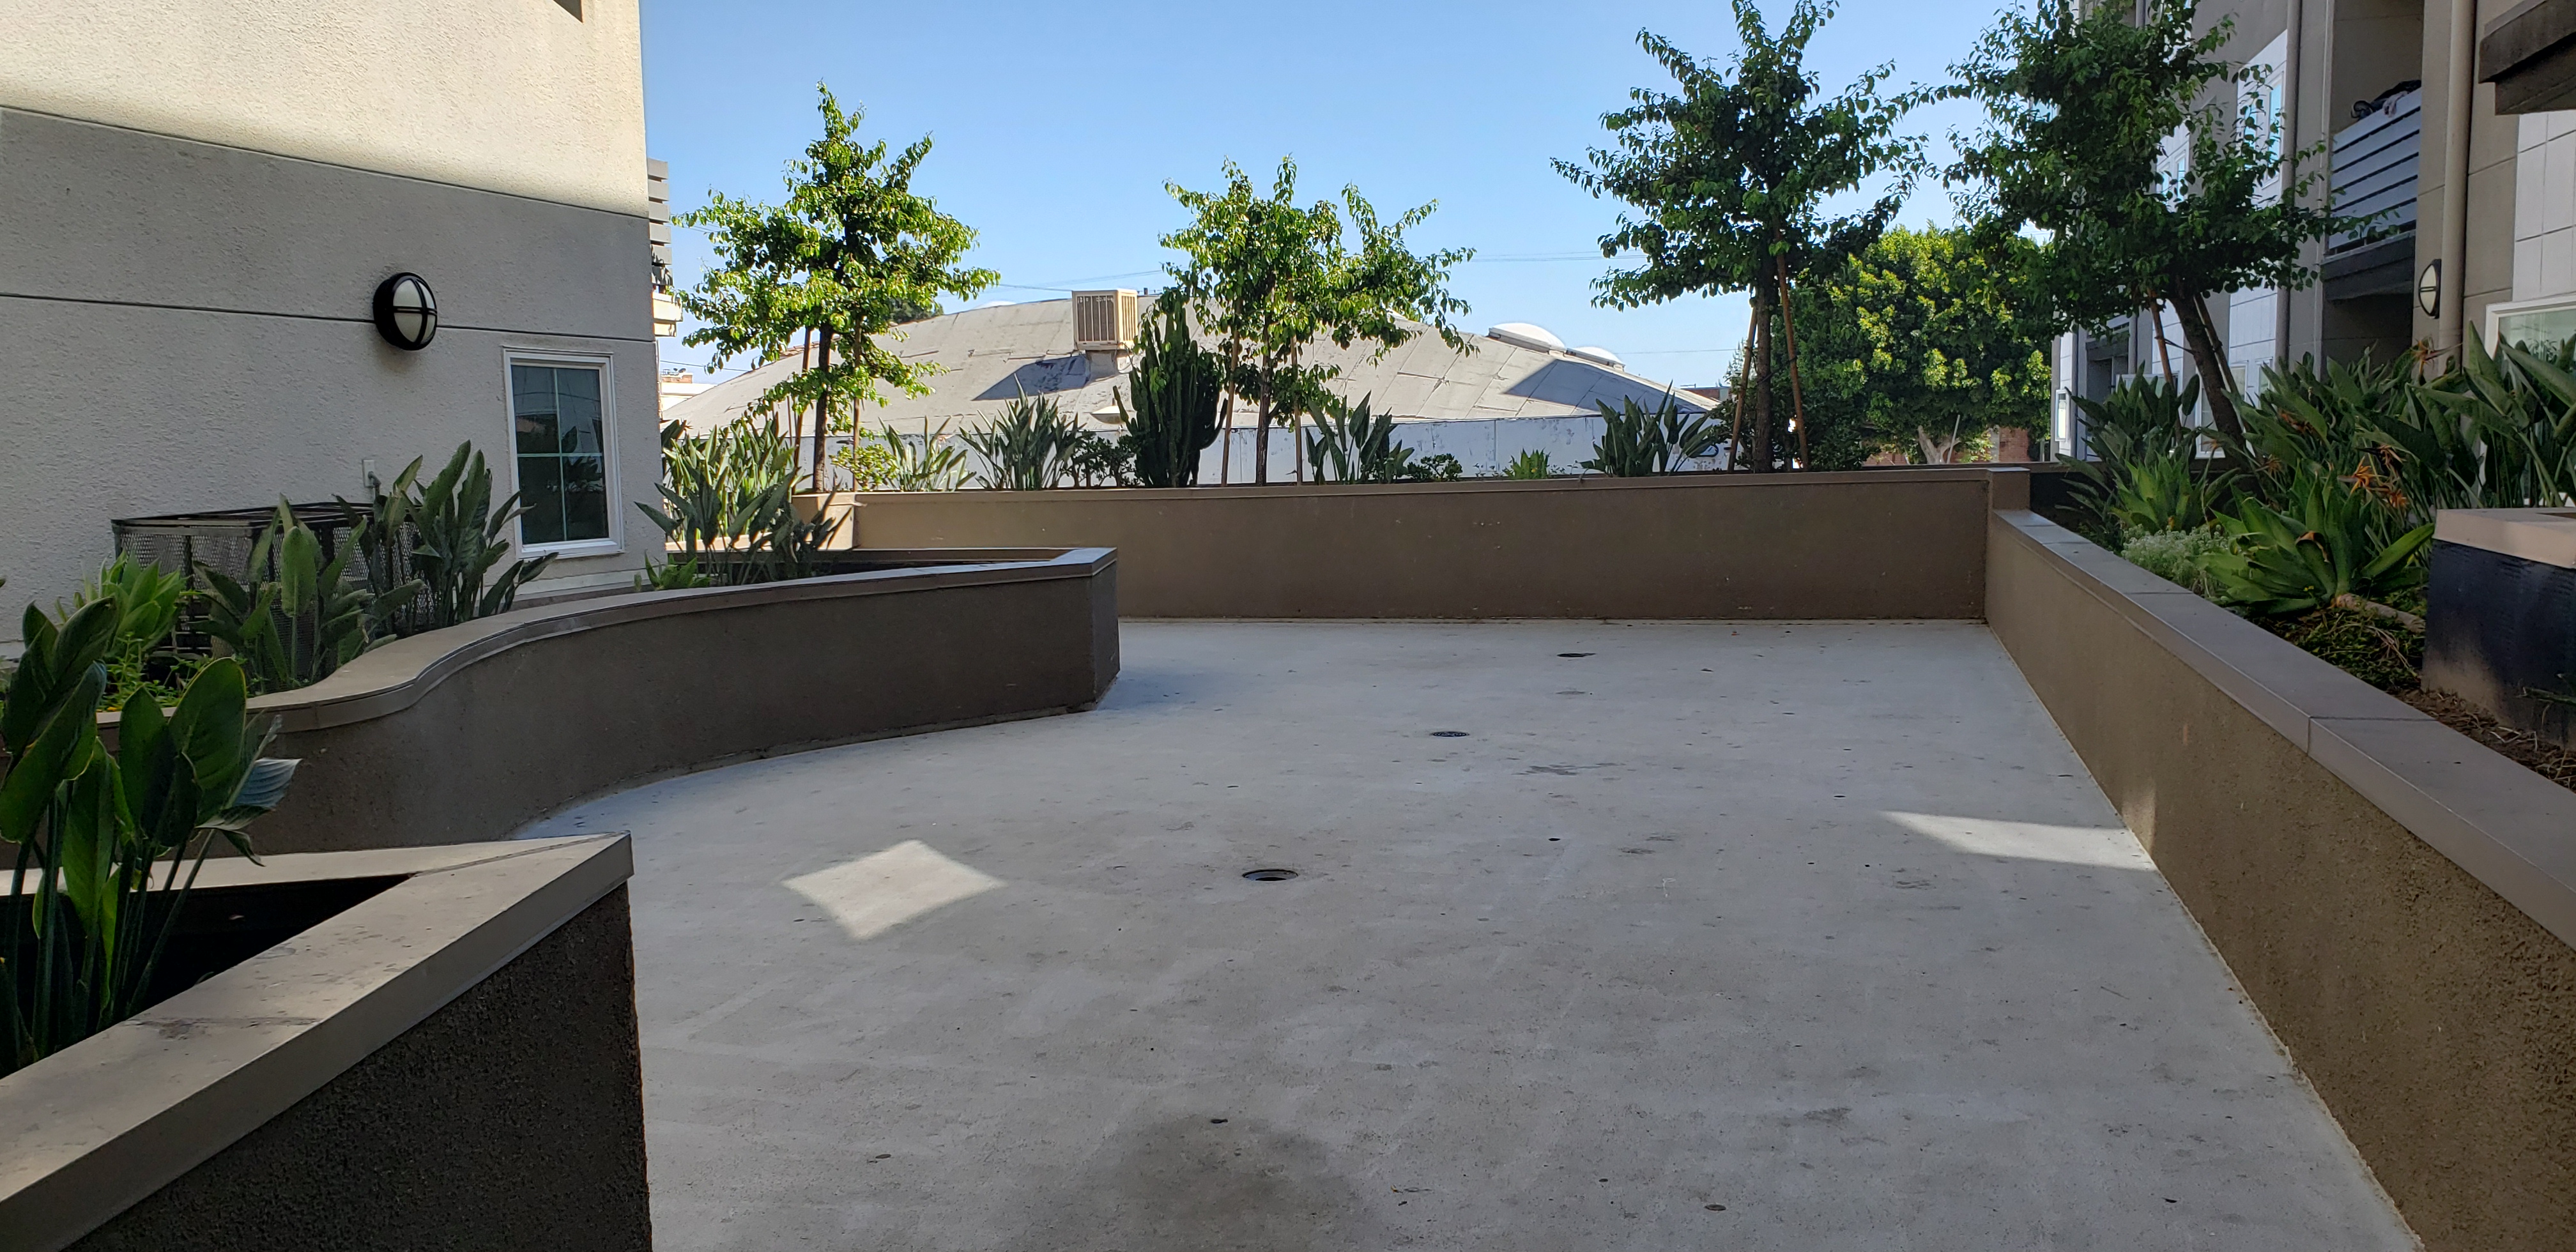 Exterior view of a garden rest area of the Menlo Family Housing